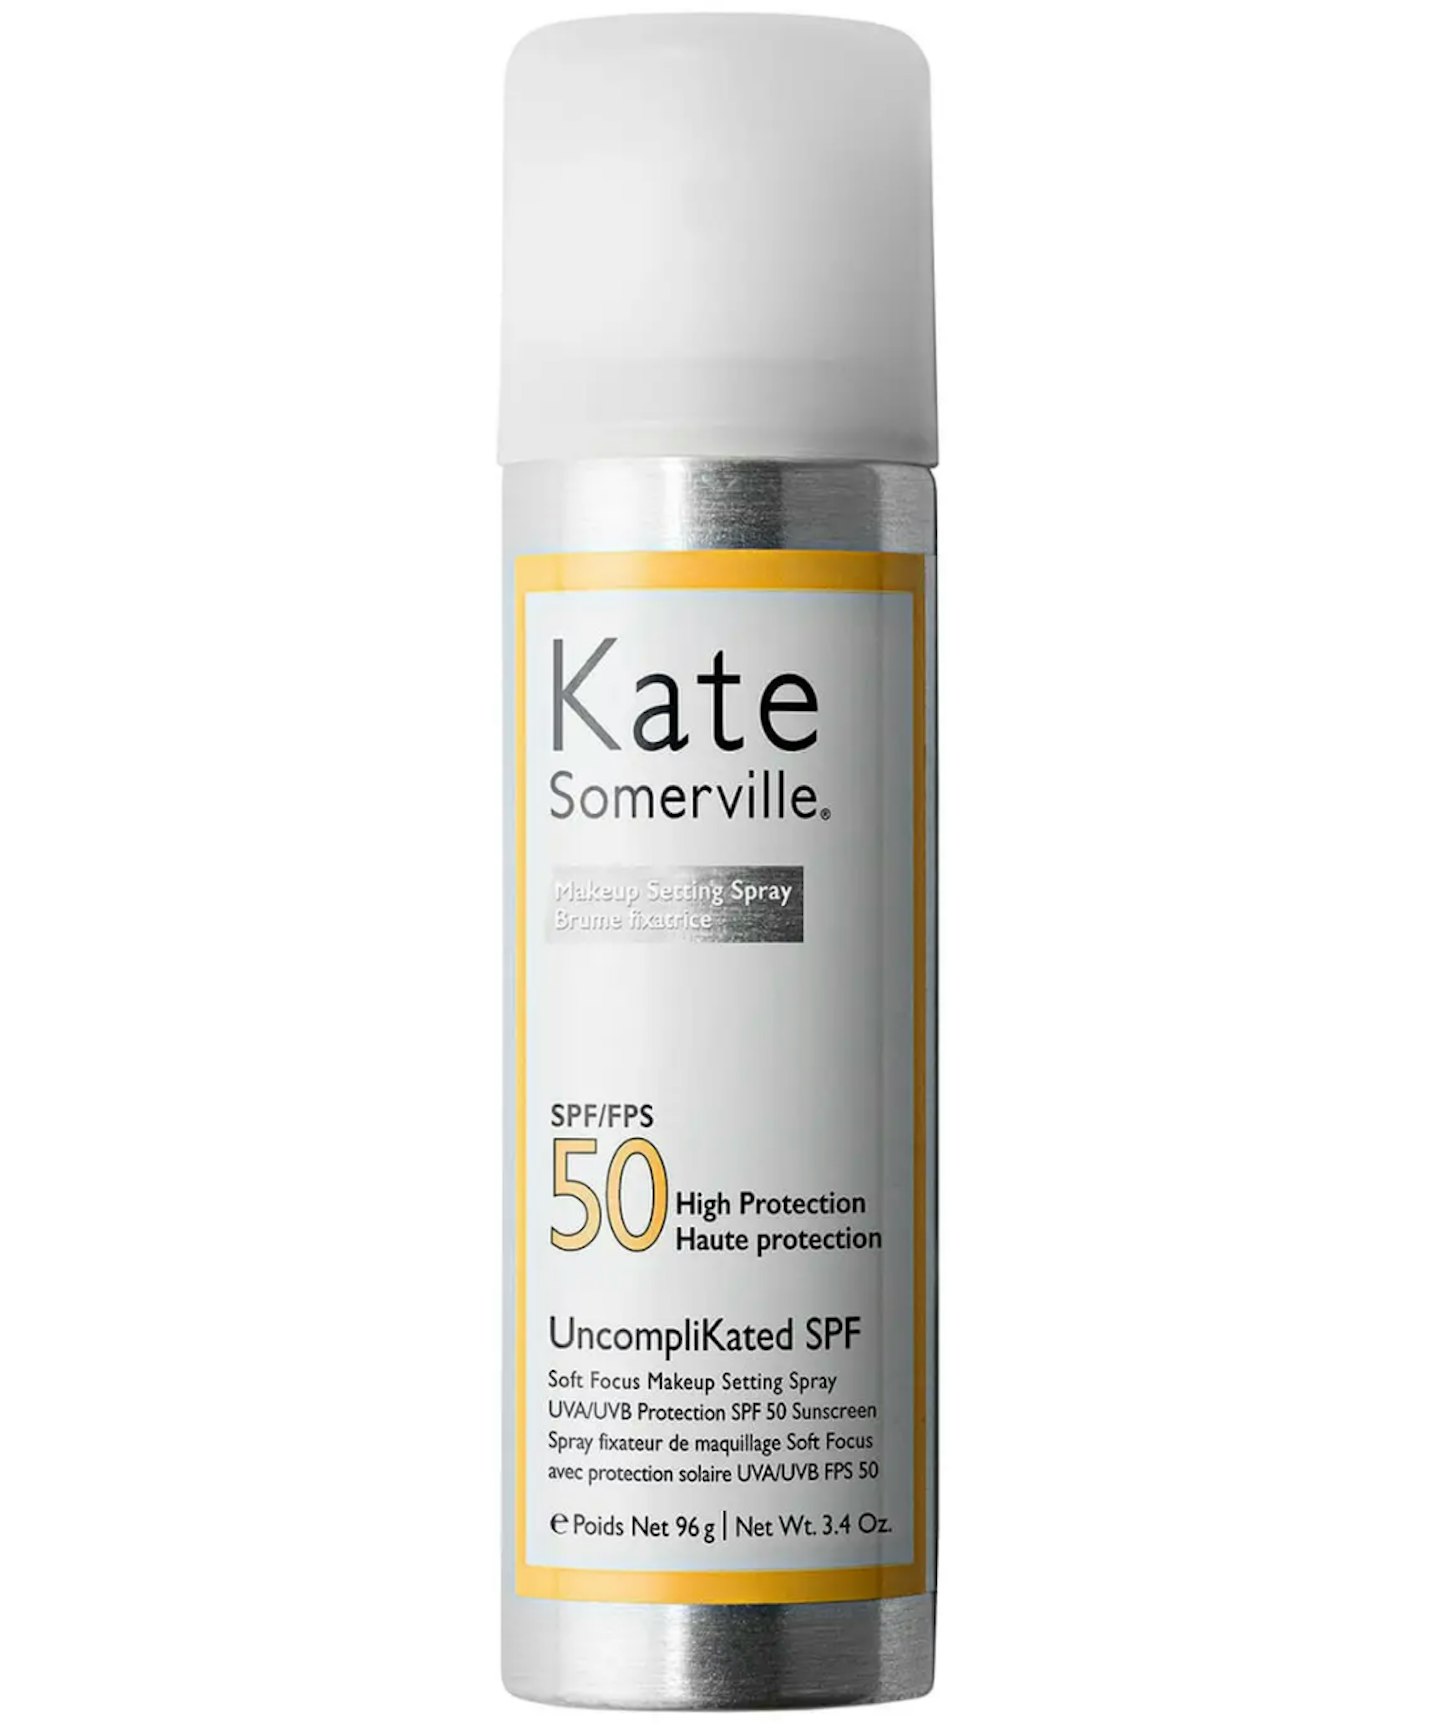 A picture of the Kate Somerville UncompliKated SPF50 Soft Focus Makeup Setting Spray